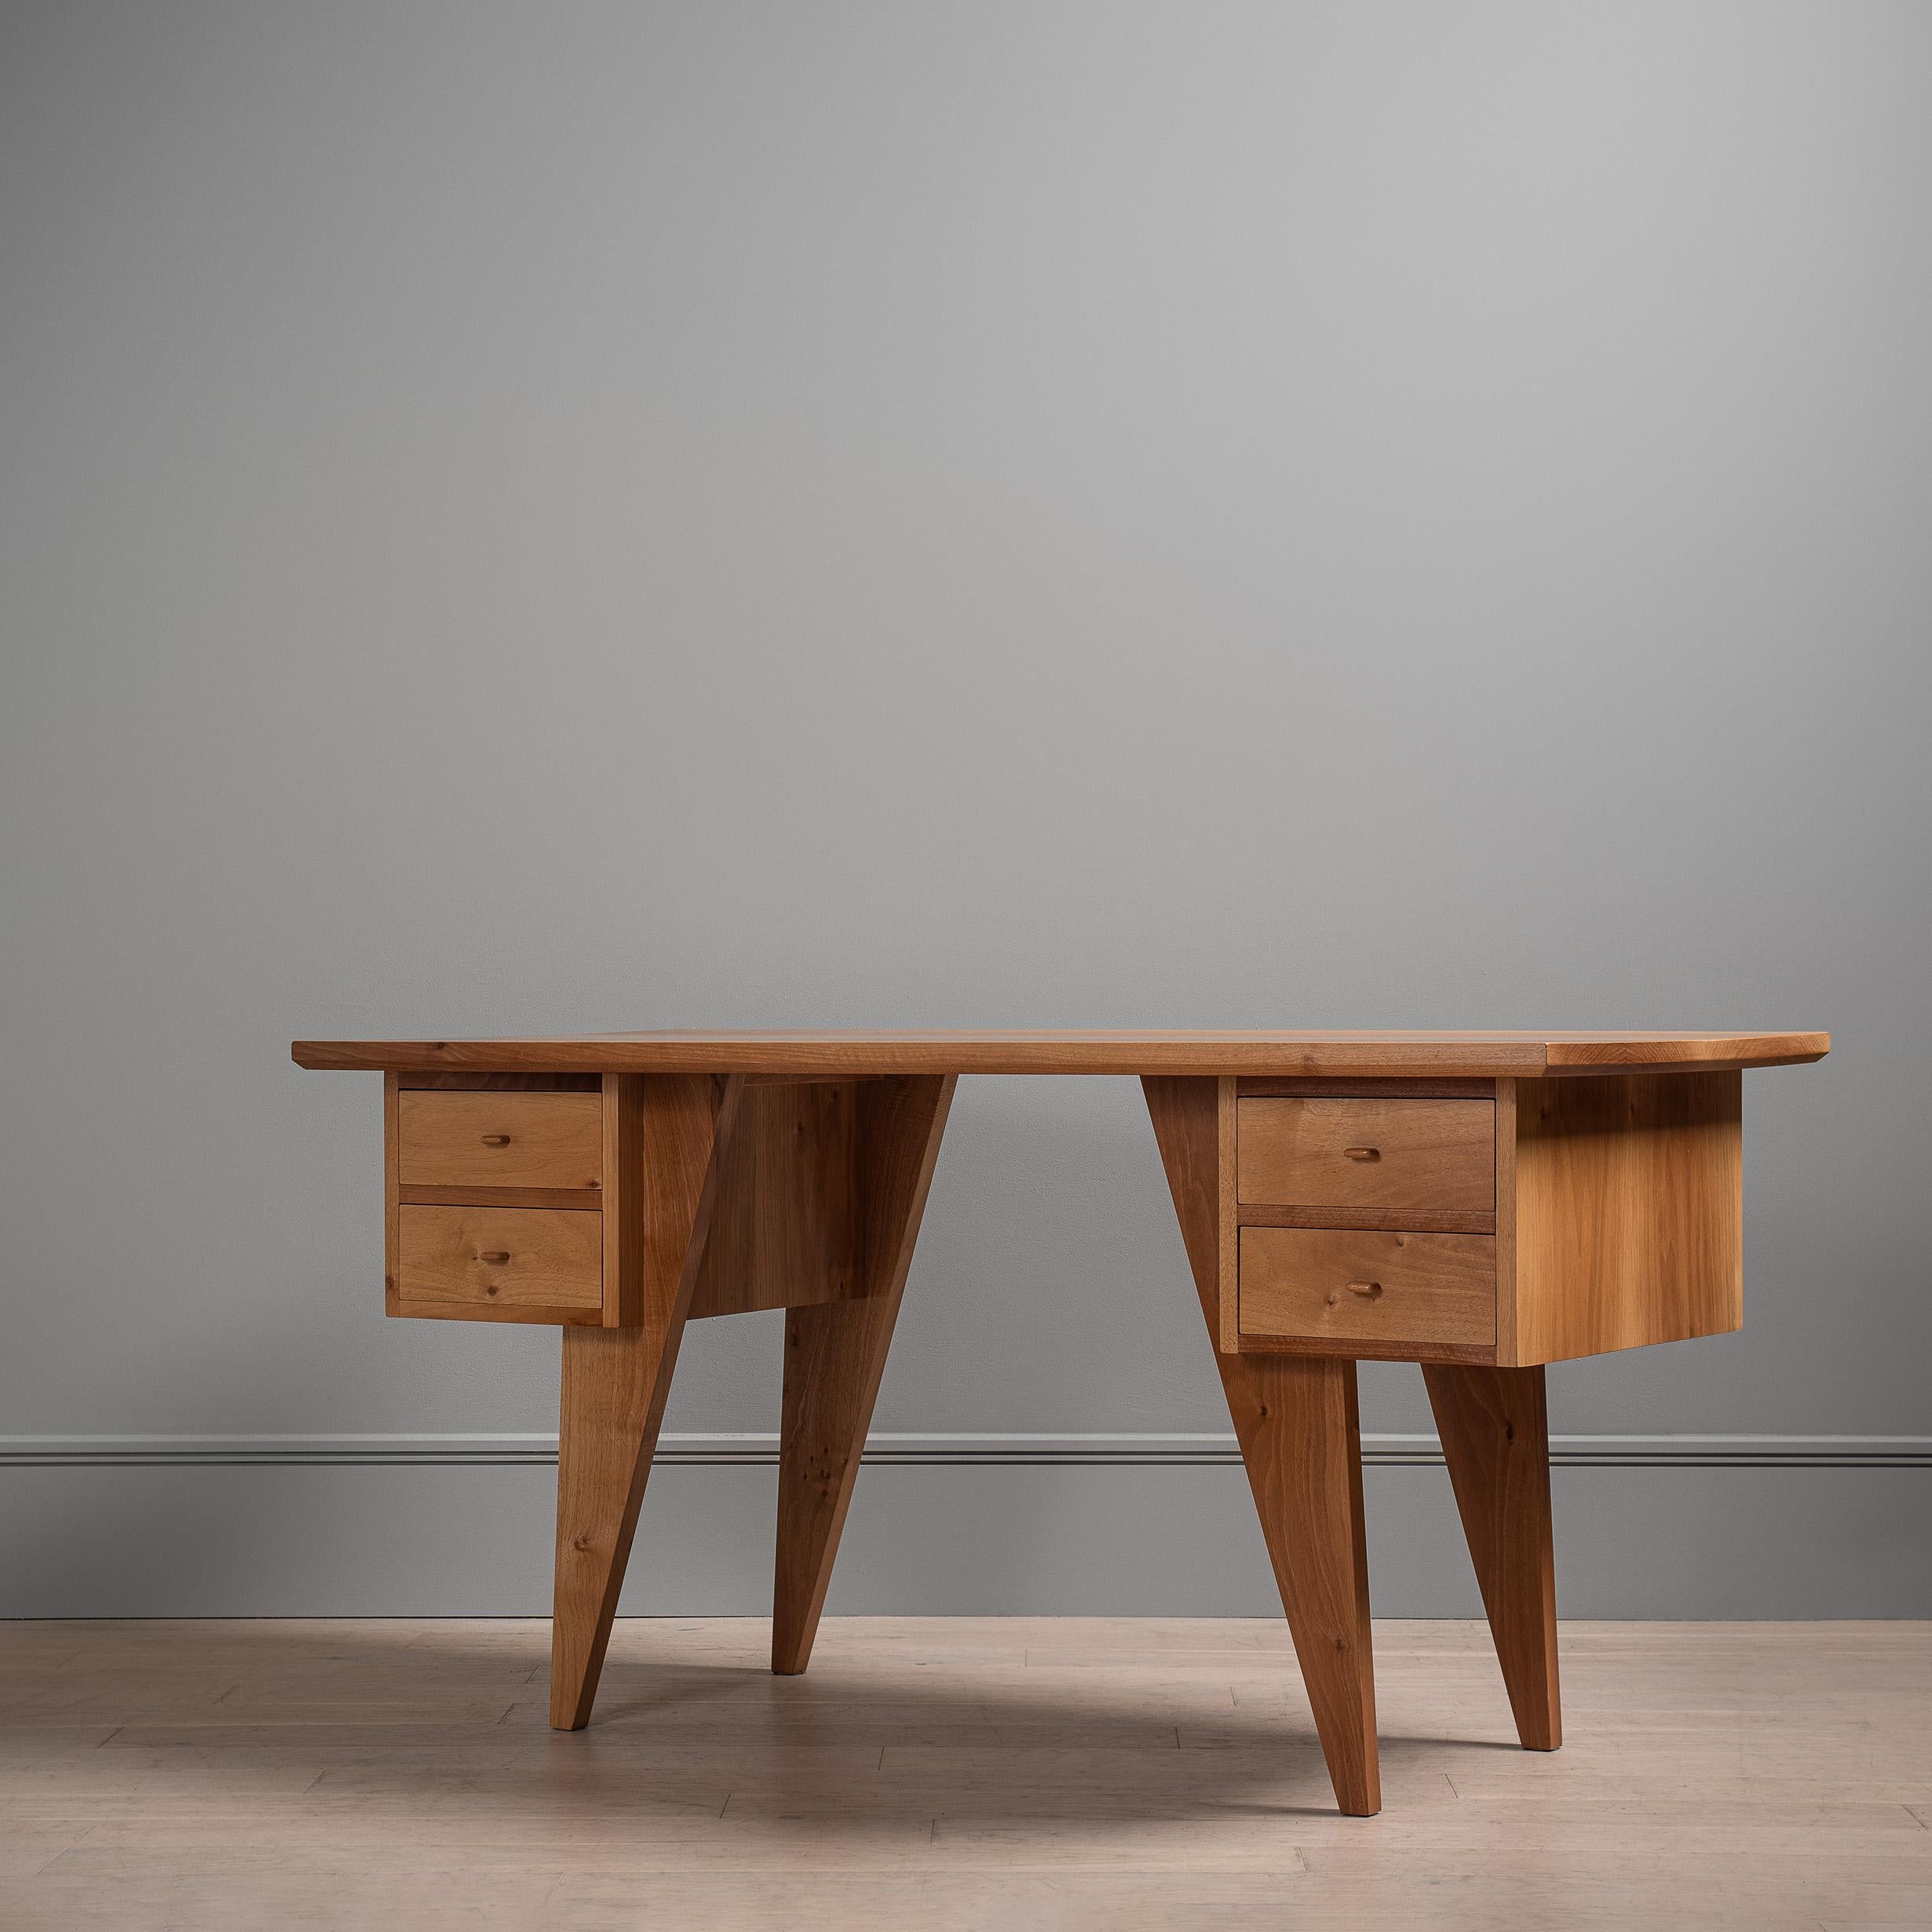 A unique and totally handcrafted desk. Designed and handmade in England by master craftsmen using traditional woodworking and cabinetry techniques. Hidden jointing and exposed acute dovetailing. The beautiful desk surface is created using wide solid